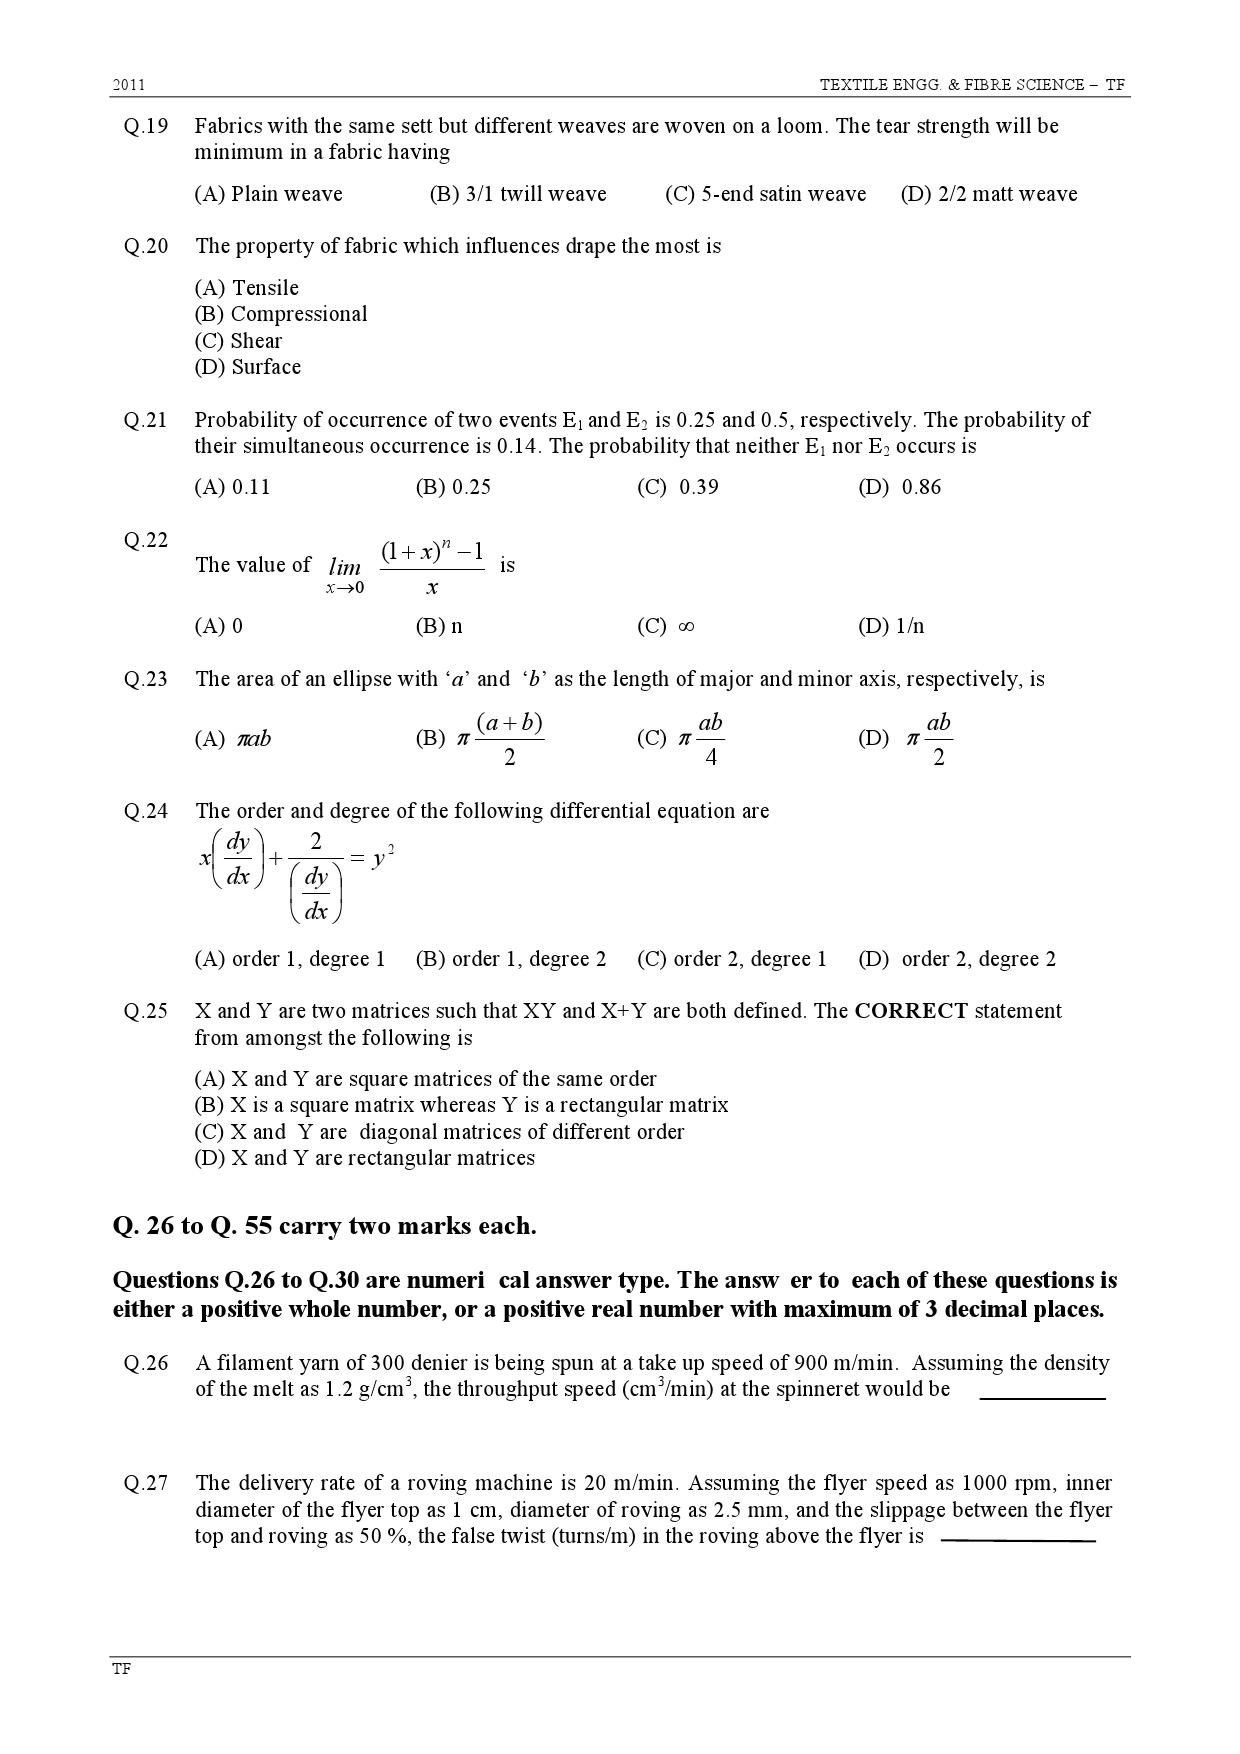 GATE Exam Question Paper 2011 Textile Engineering and Fibre Science 4